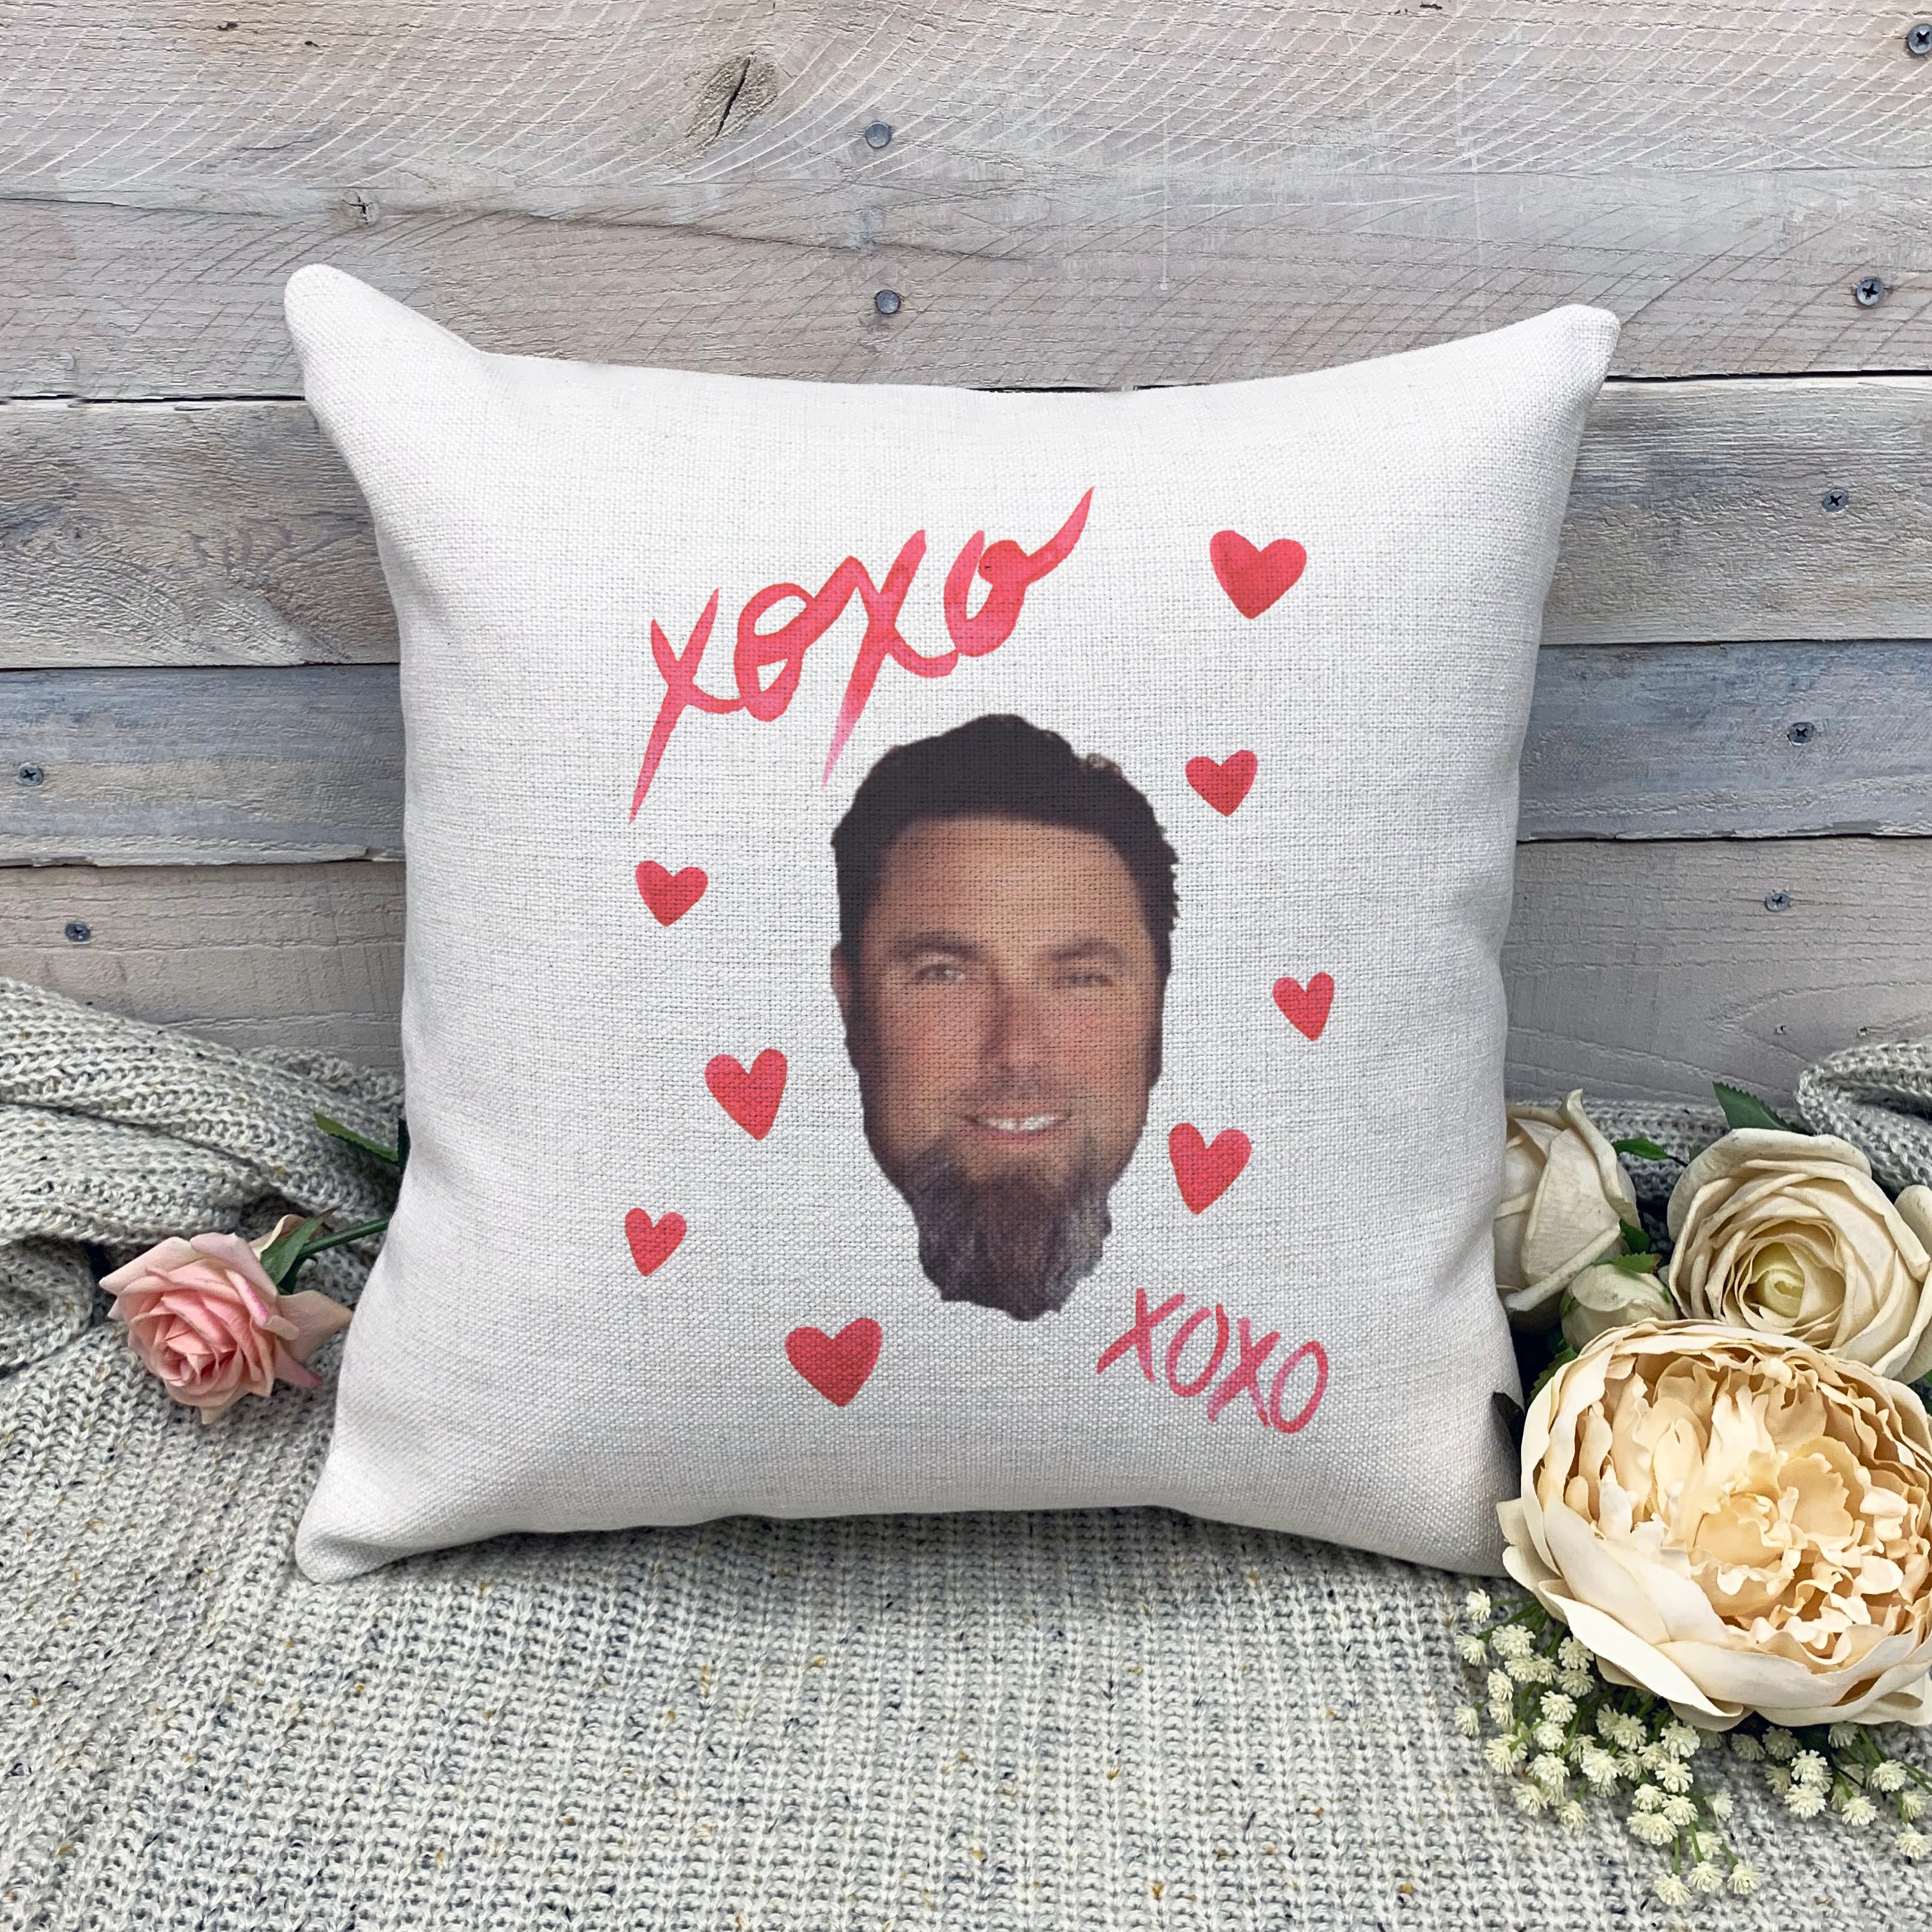 Personalized Pillow Cases. Custom Pillow Cases With Your Photos